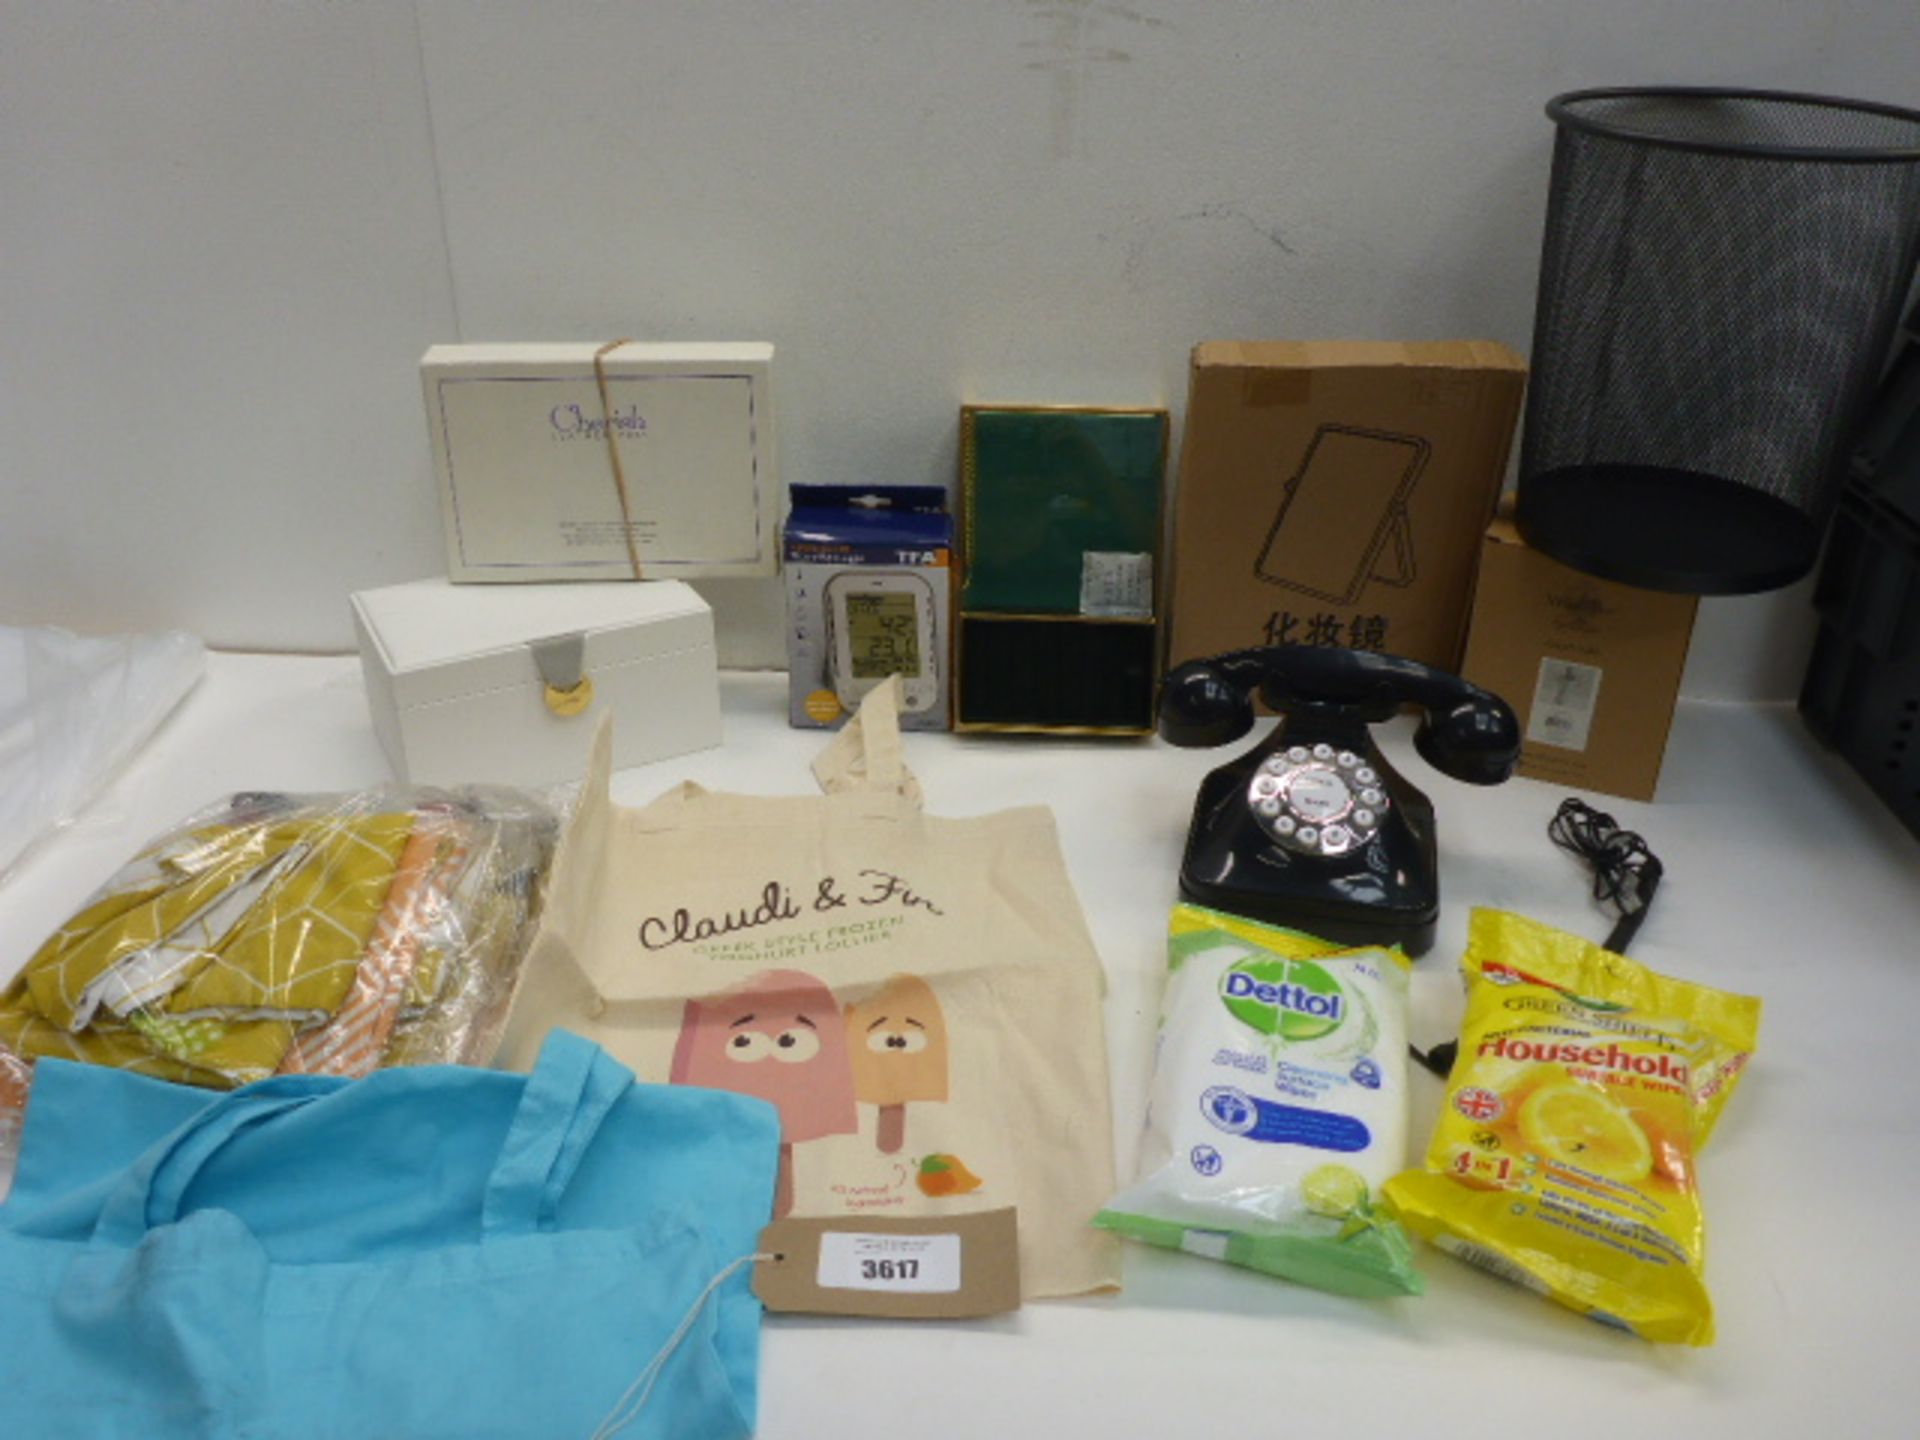 Cherish leather care kit, Thermo hygo logger, waste bin, surface wipes, telephone, shopping bags,